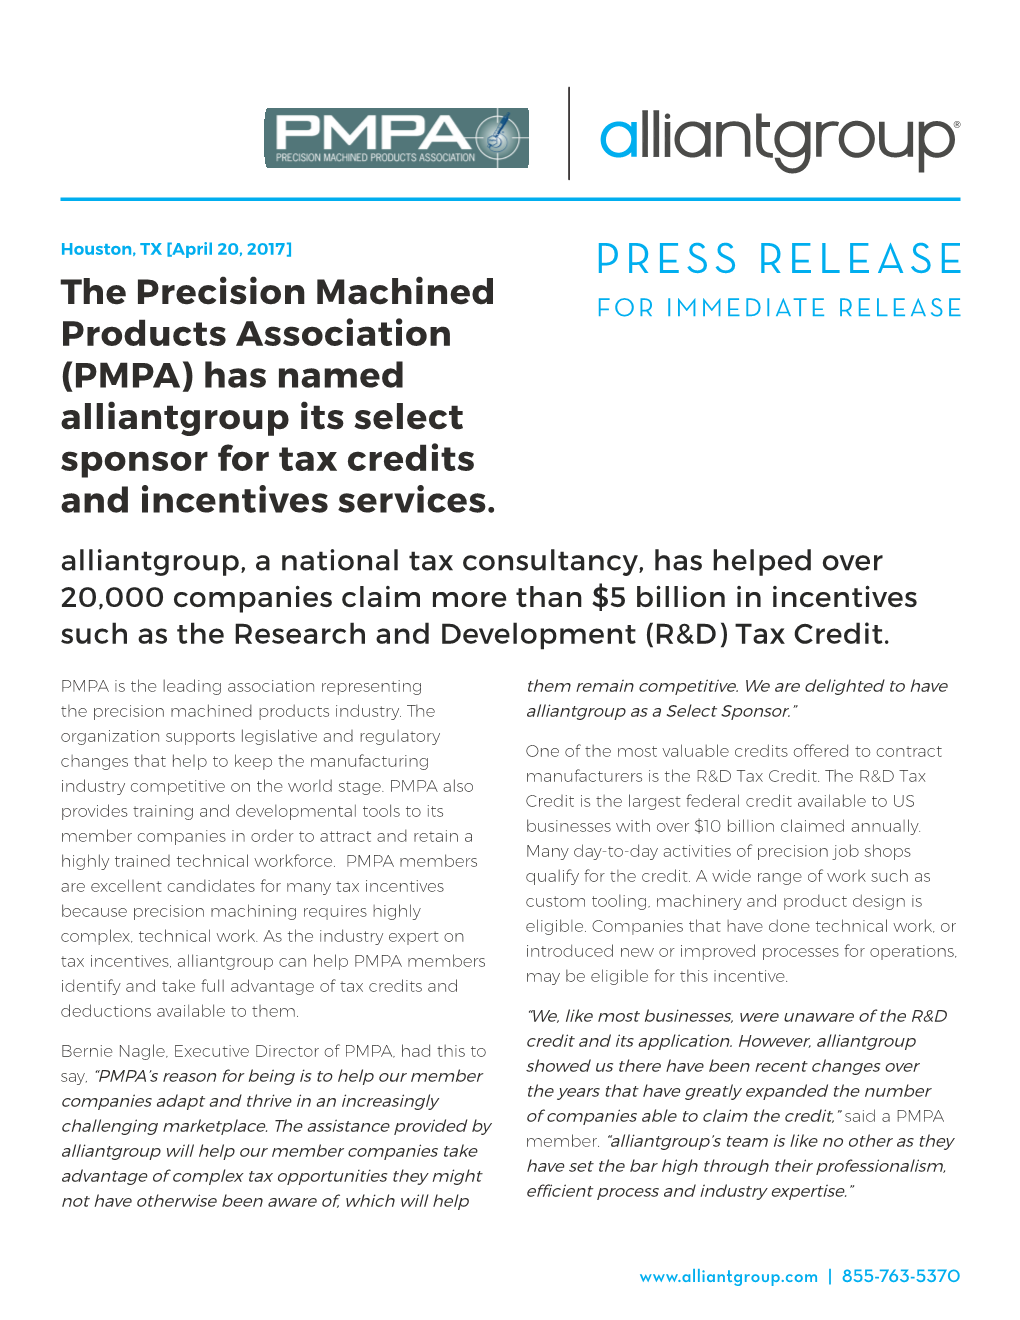 The Precision Machined Products Association (PMPA) Has Named Alliantgroup Its Select Sponsor for Tax Credits and Incentives Services